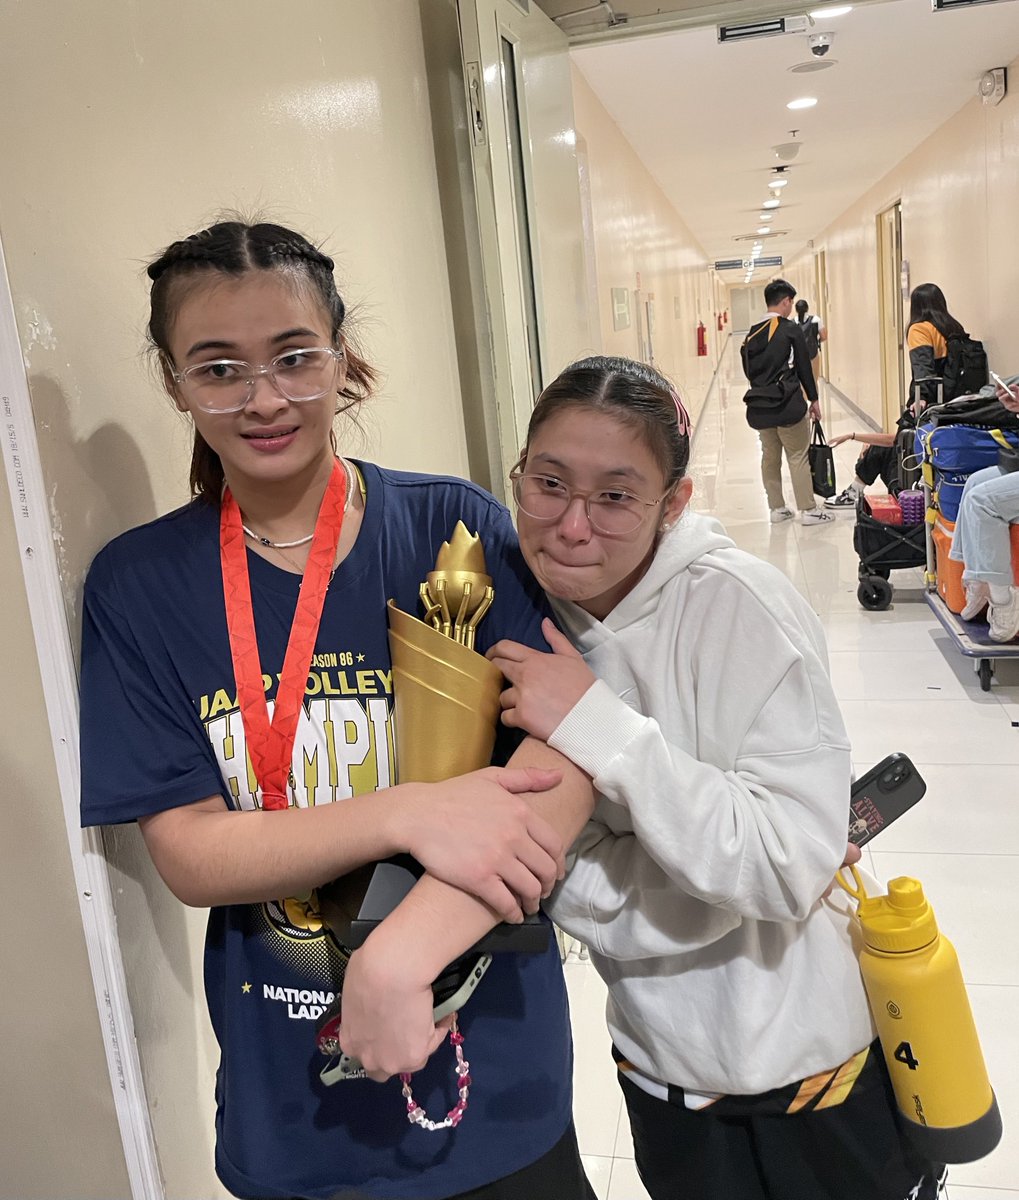 MORE THAN JUST VOLLEYBALL 🤗 Bestfriends Bella Belen and Detdet Pepito share a moment together at the end of their duel in the #UAAPSeason86 finals. Pepito still in tears but Belen is quick to comfort her pal with banters and jokes from their childhood. | @bryanulanday